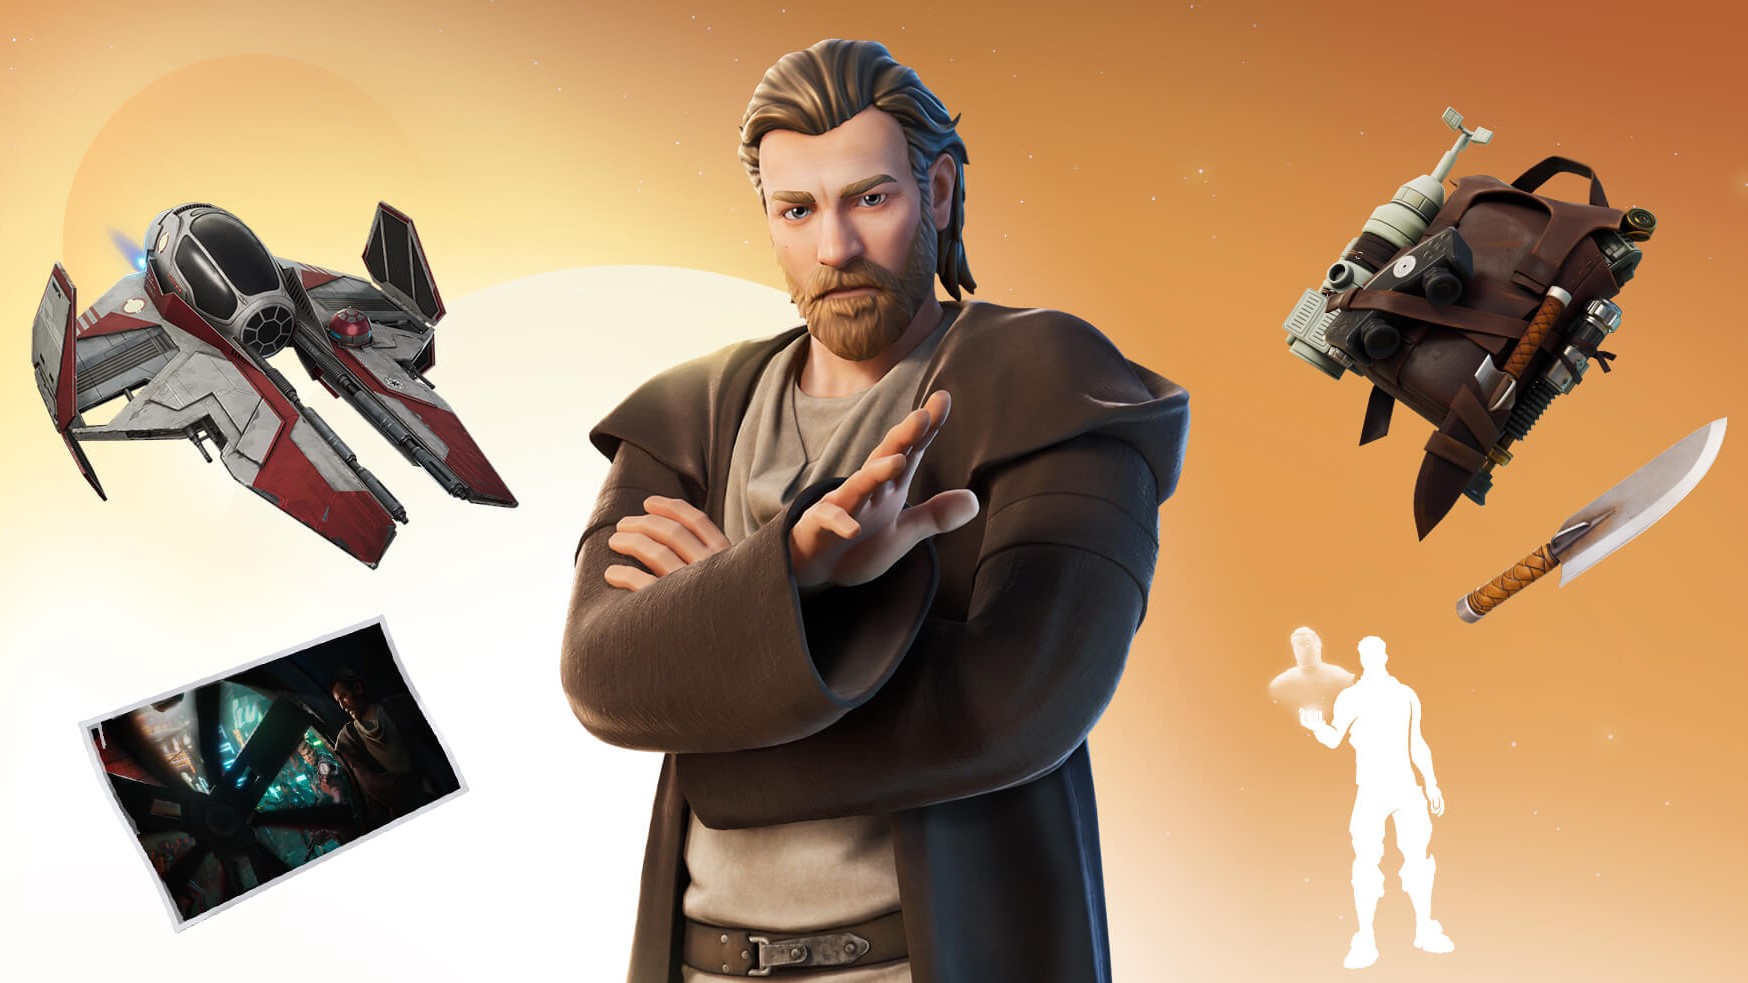  Become more powerful than you can possibly imagine with Fortnite's latest skin 